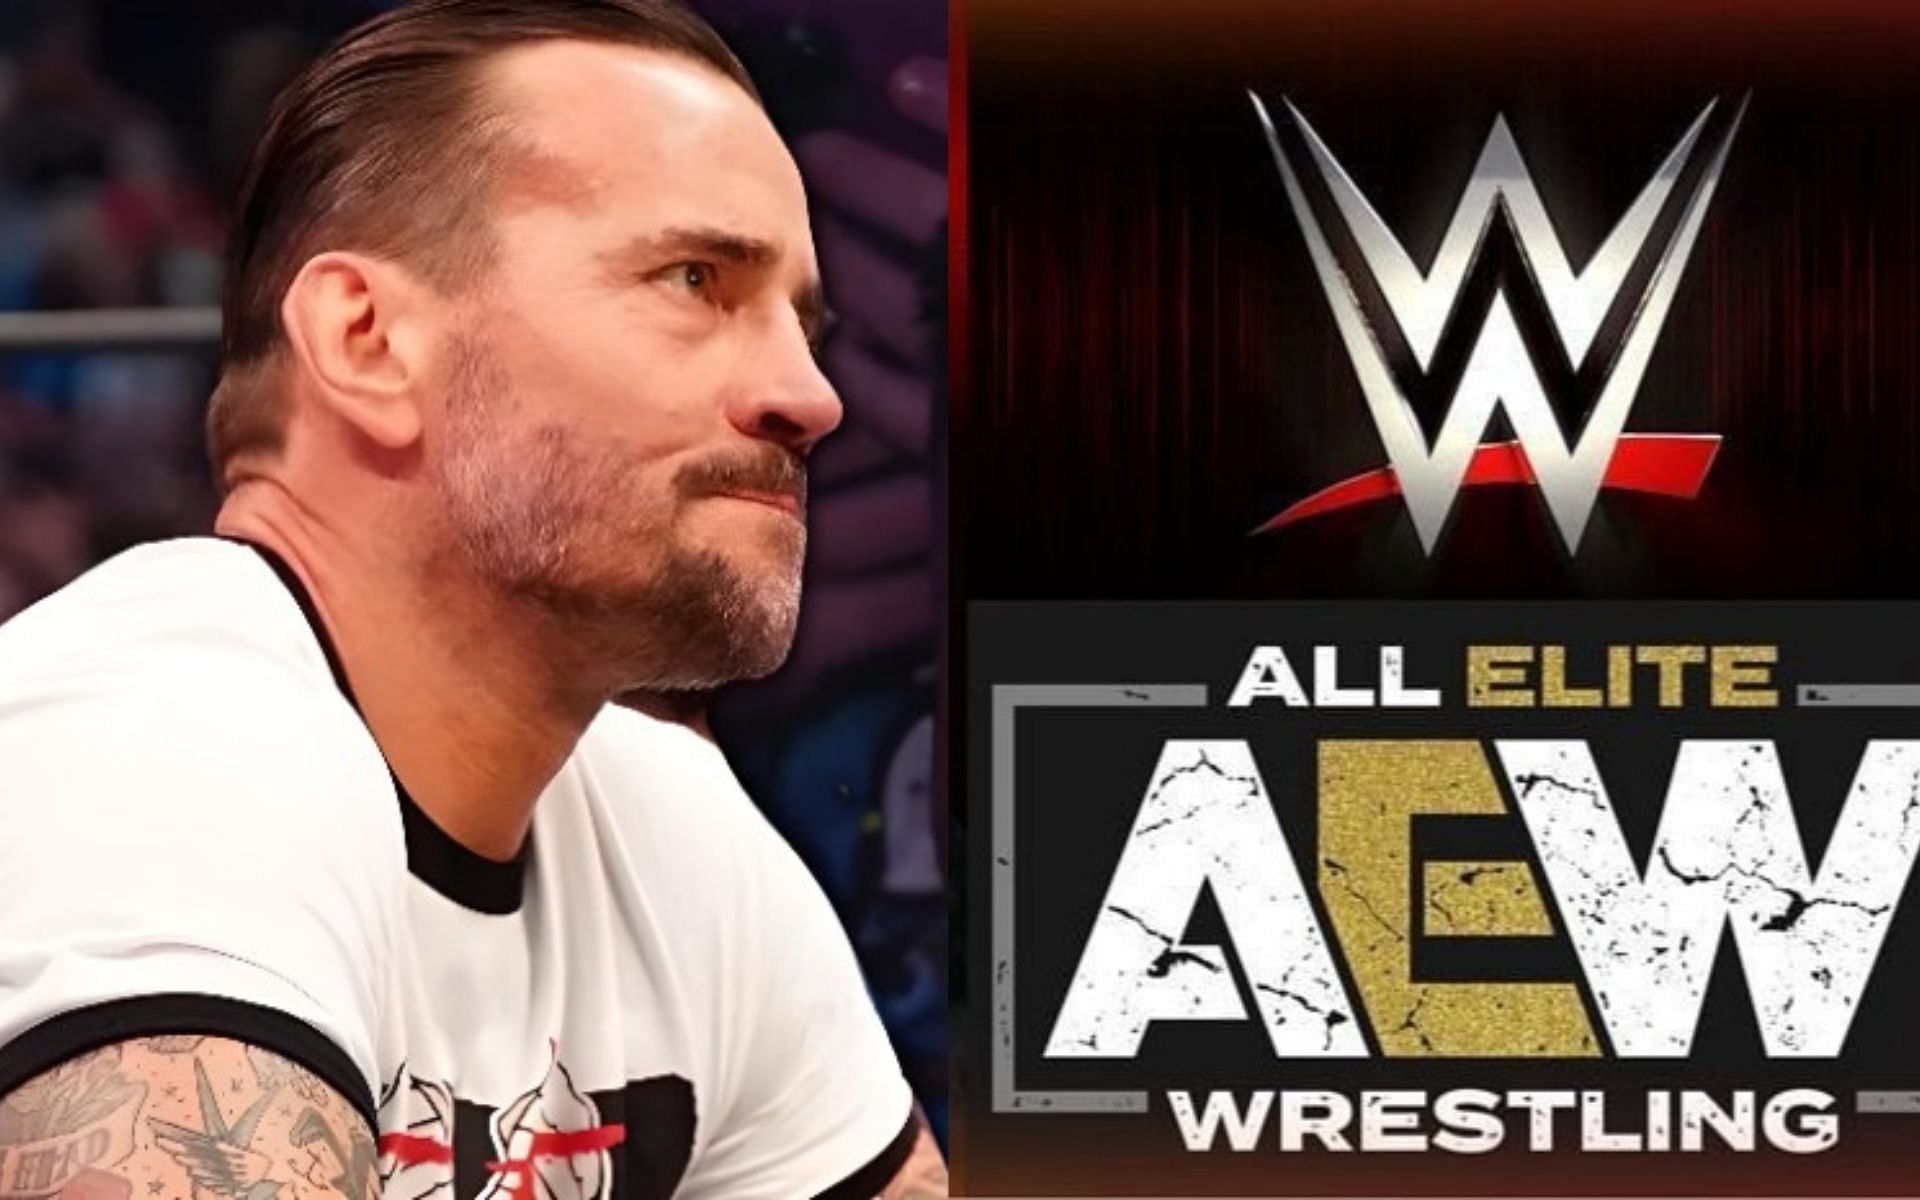 CM Punk and WWE legend have been going at each other!